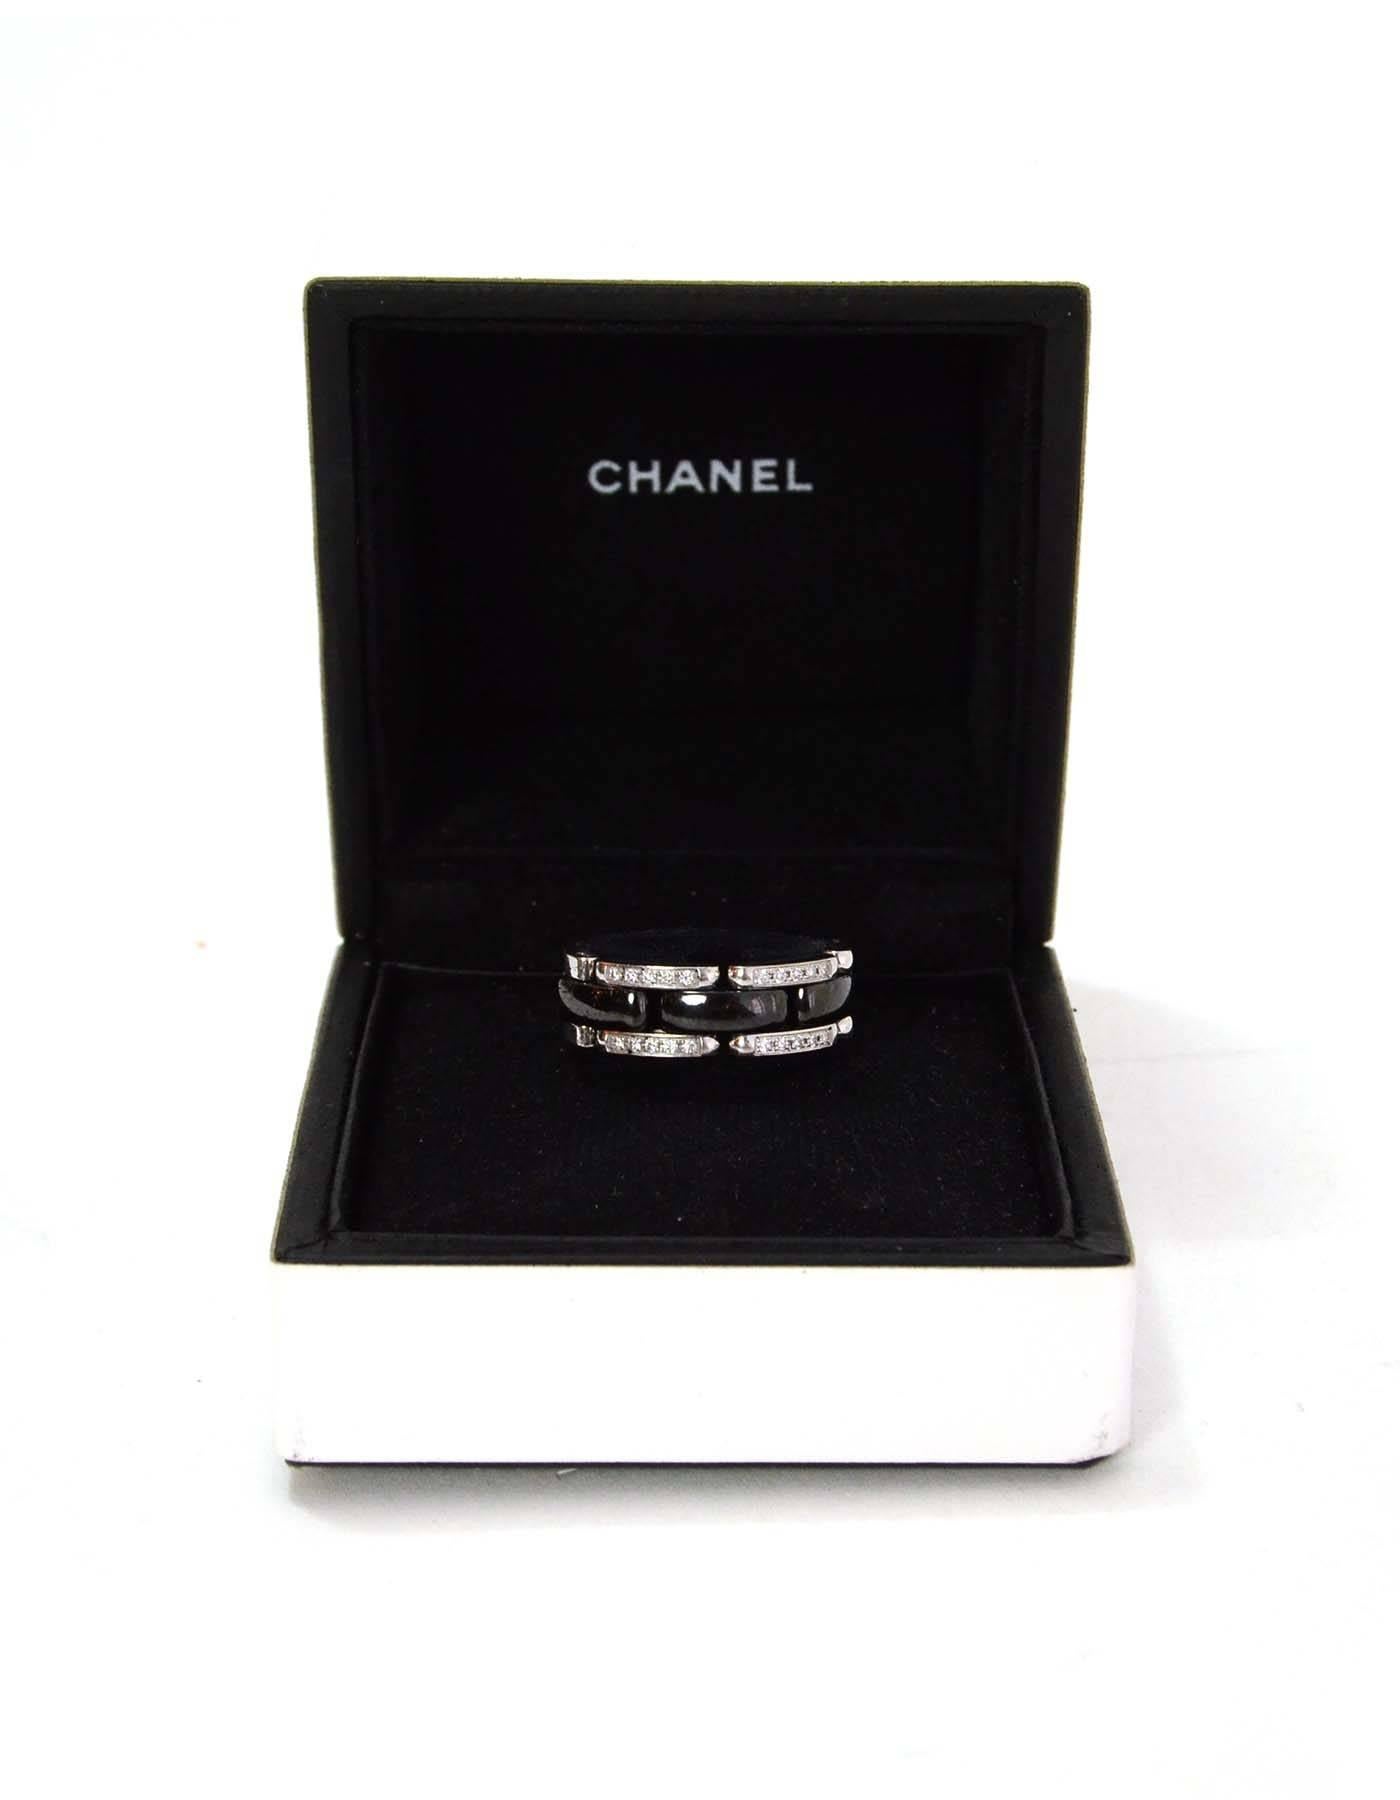 Chanel 18k Gold & Diamond Medium Ultra Ring 
Features black ceramic links throughout and .2ctw diamonds

Color: Silver and black
Materials: 18k white gold, diamonds and ceramic
Closure: None
Stamp: 20P 03339
Retail Price: $4,600 +